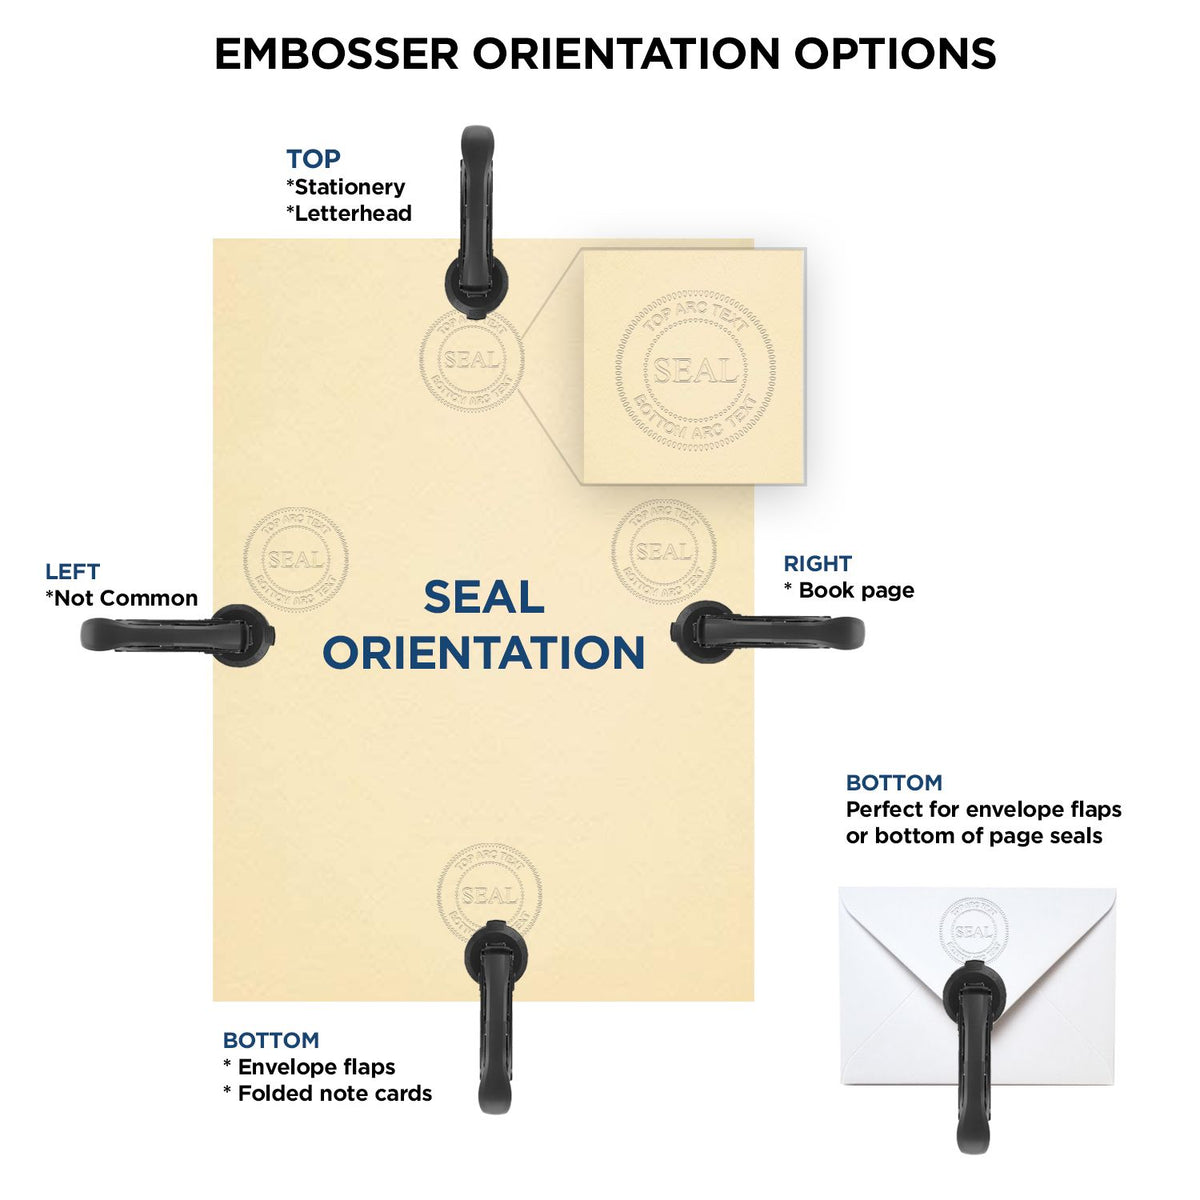 An infographic for the Handheld Guam Architect Seal Embosser showing embosser orientation, this is showing examples of a top, bottom, right and left insert.